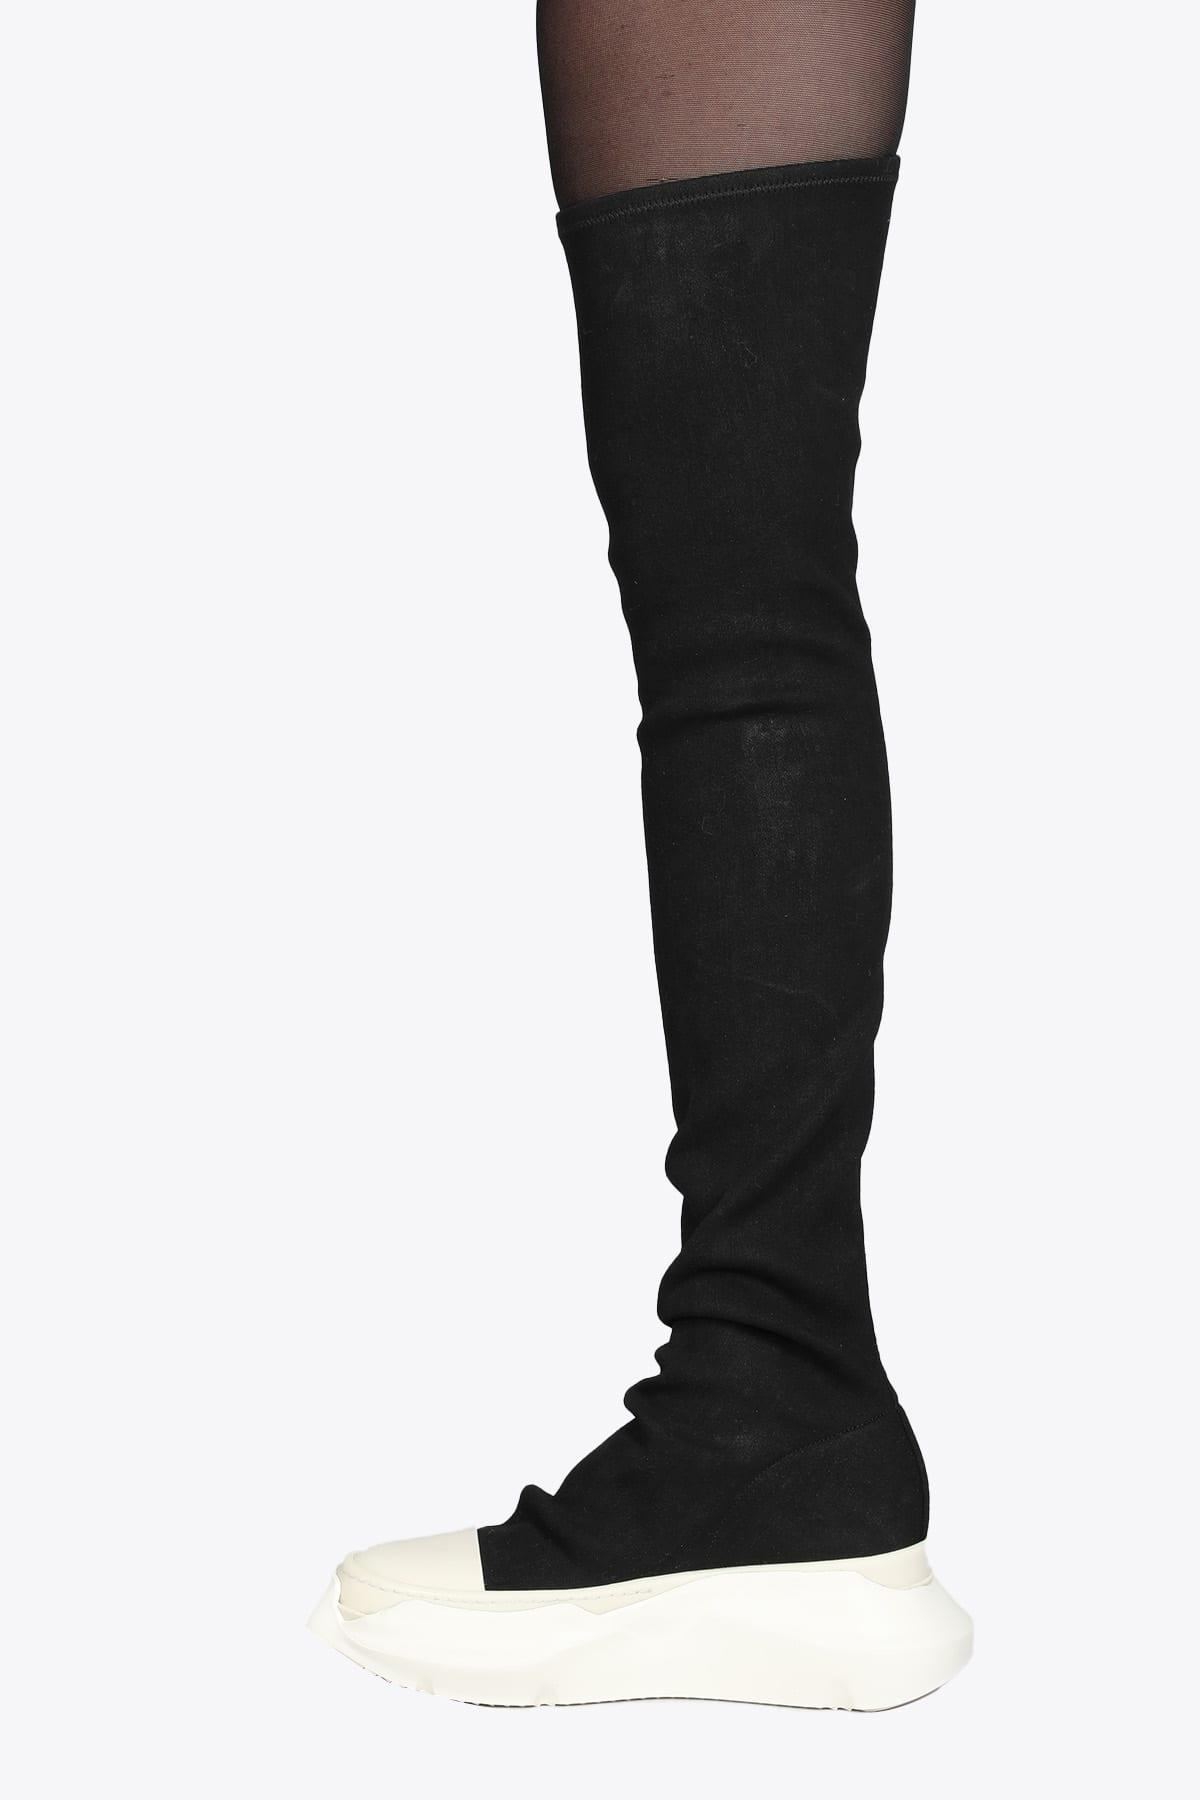 Rick Owens DRKSHDW Stivali Denim Abstract Black Stretch Canvas Abstract  Thigh High Boots | Lyst